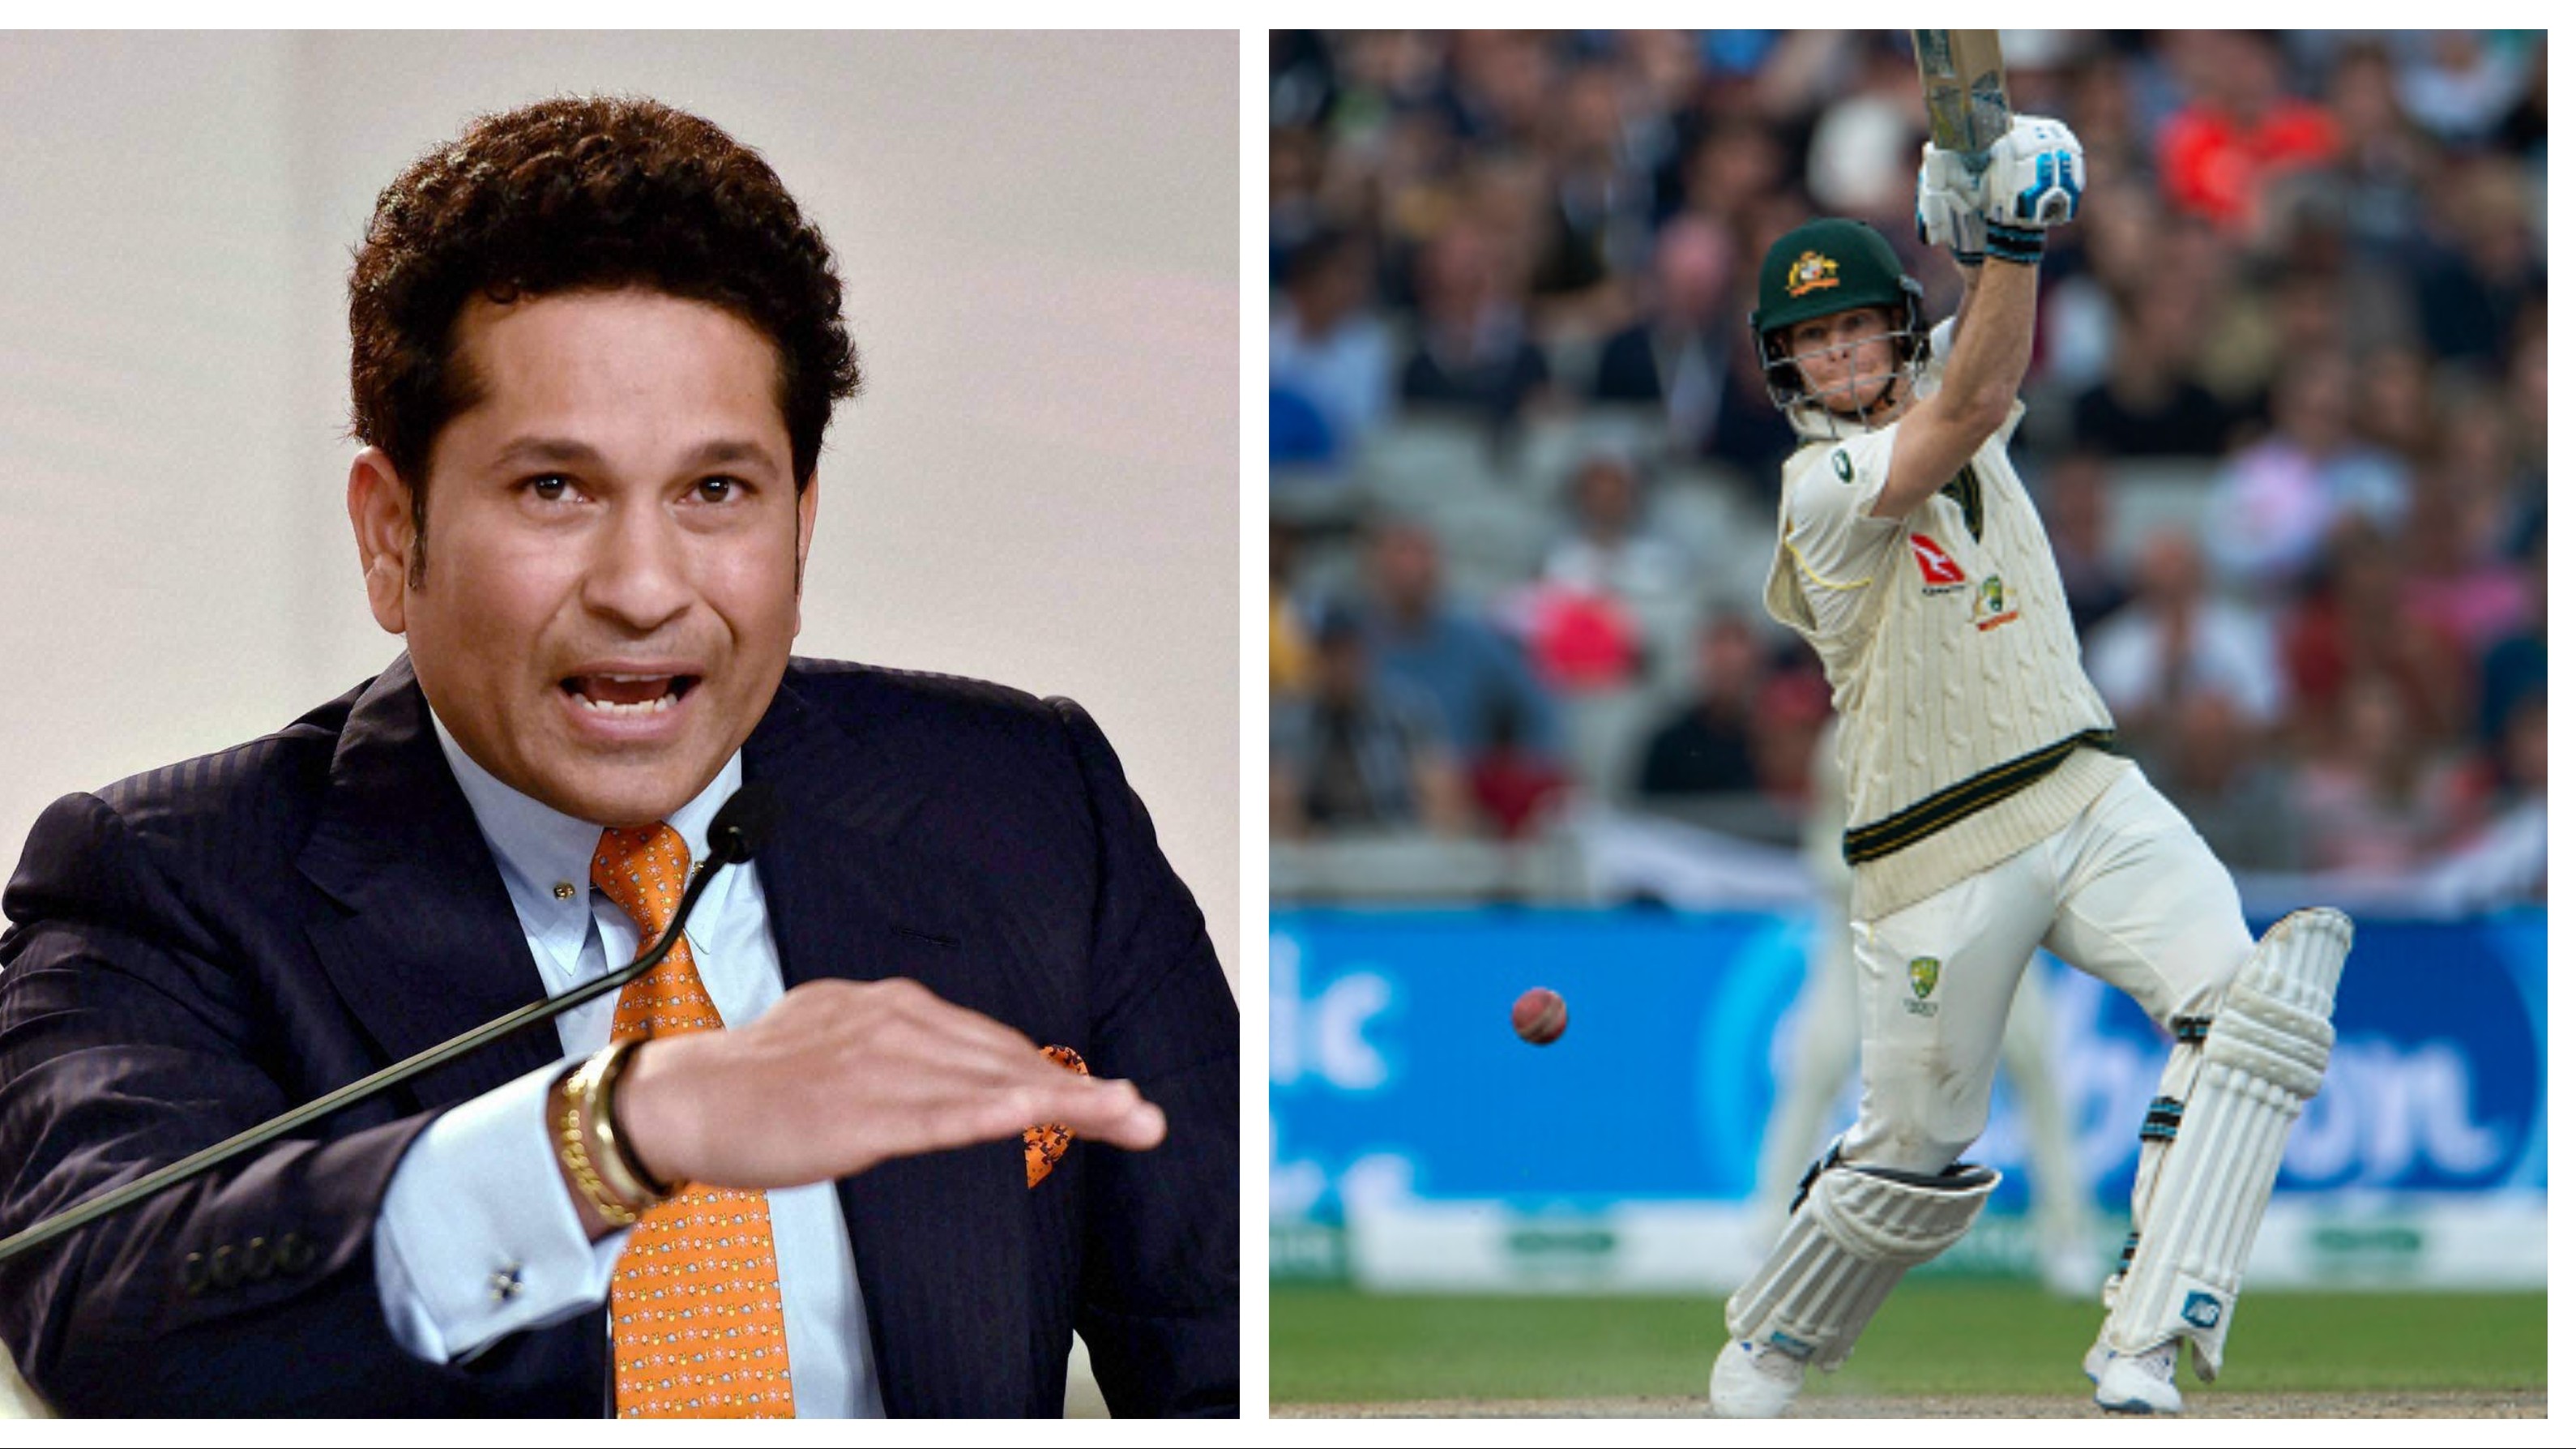 AUS v IND 2020-21: Tendulkar dissects Smith's technique, offers Indian bowlers advice against him